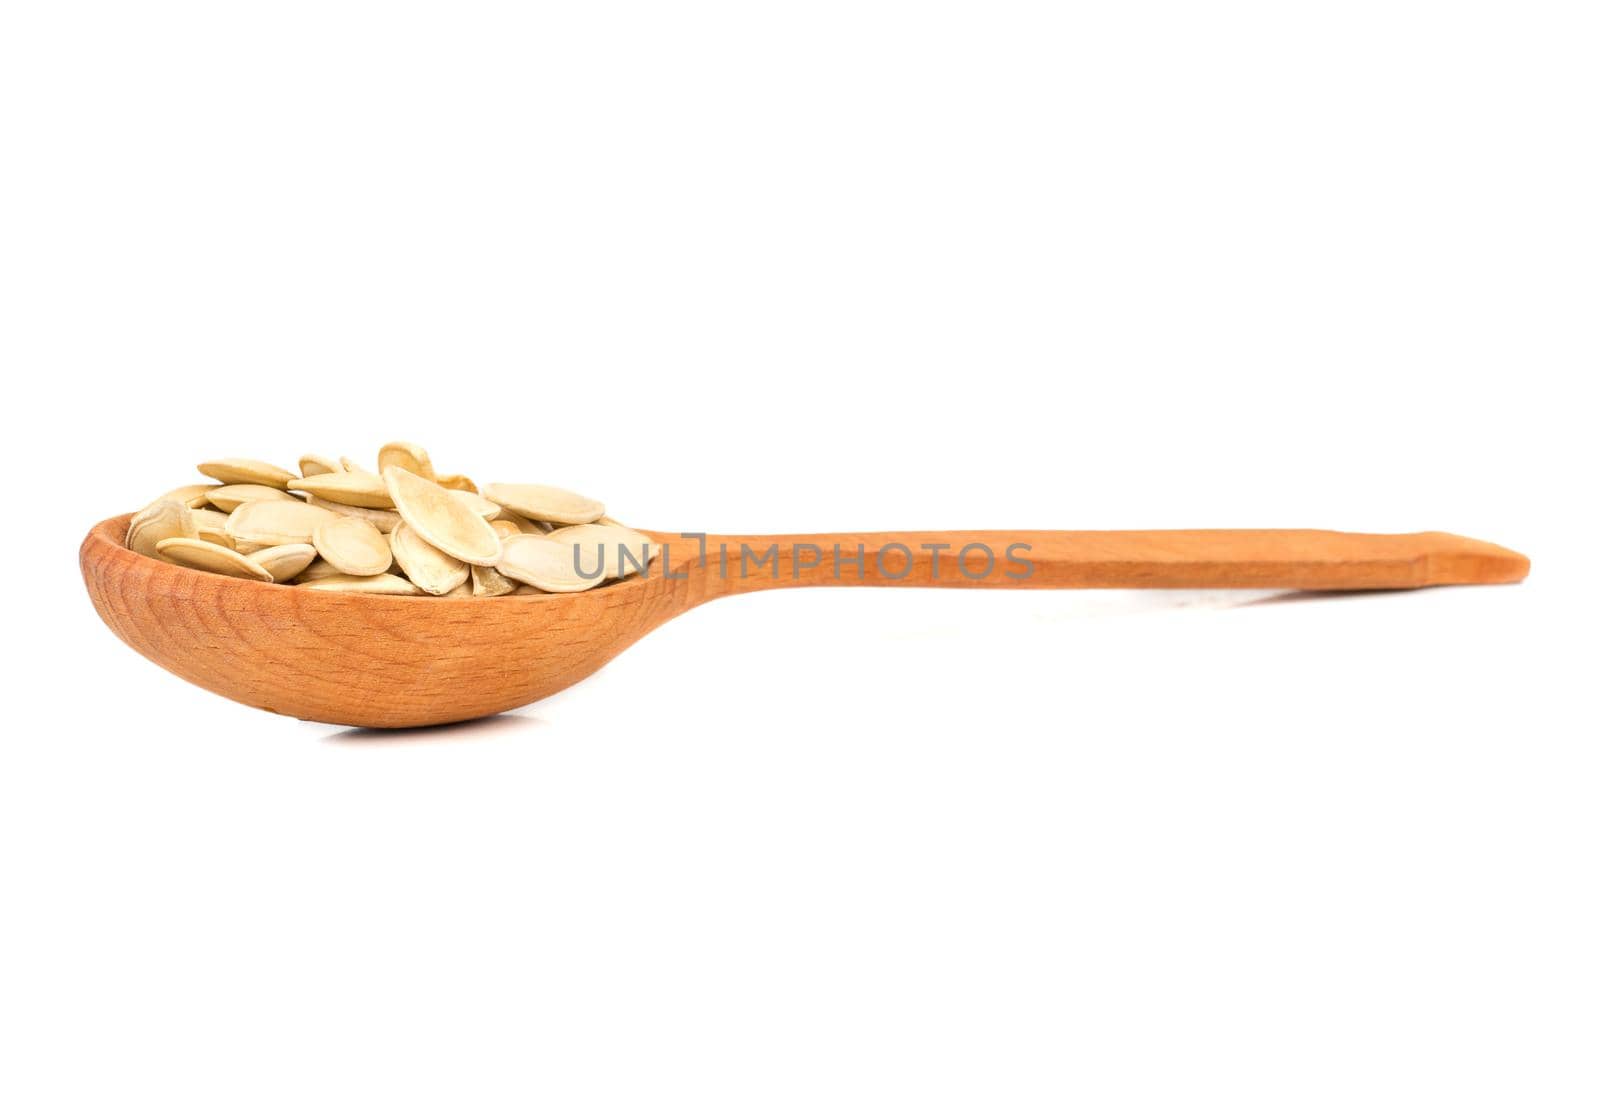 Roasted pumpkin seeds in wooden spoon on white background